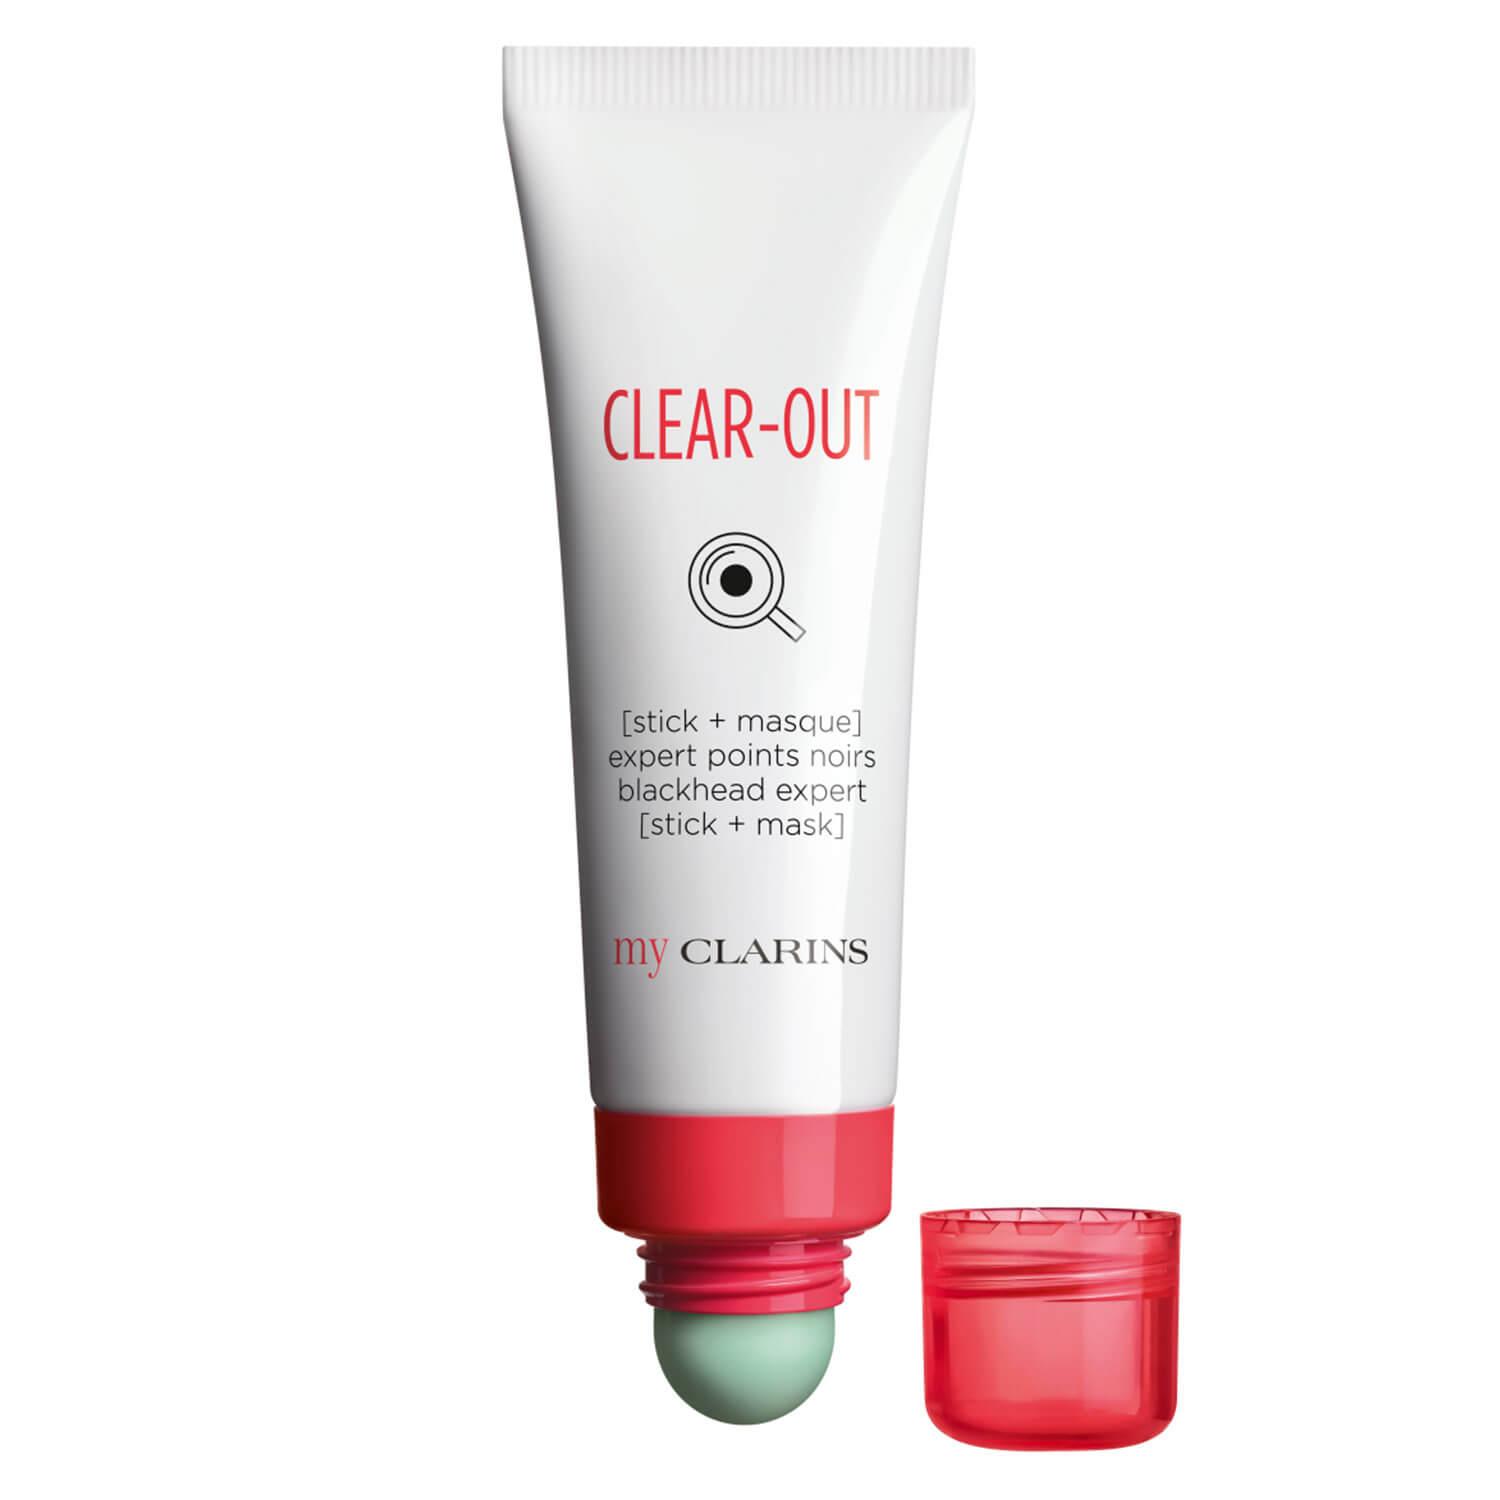 myCLARINS - CLEAR-OUT Expert Points Noirs